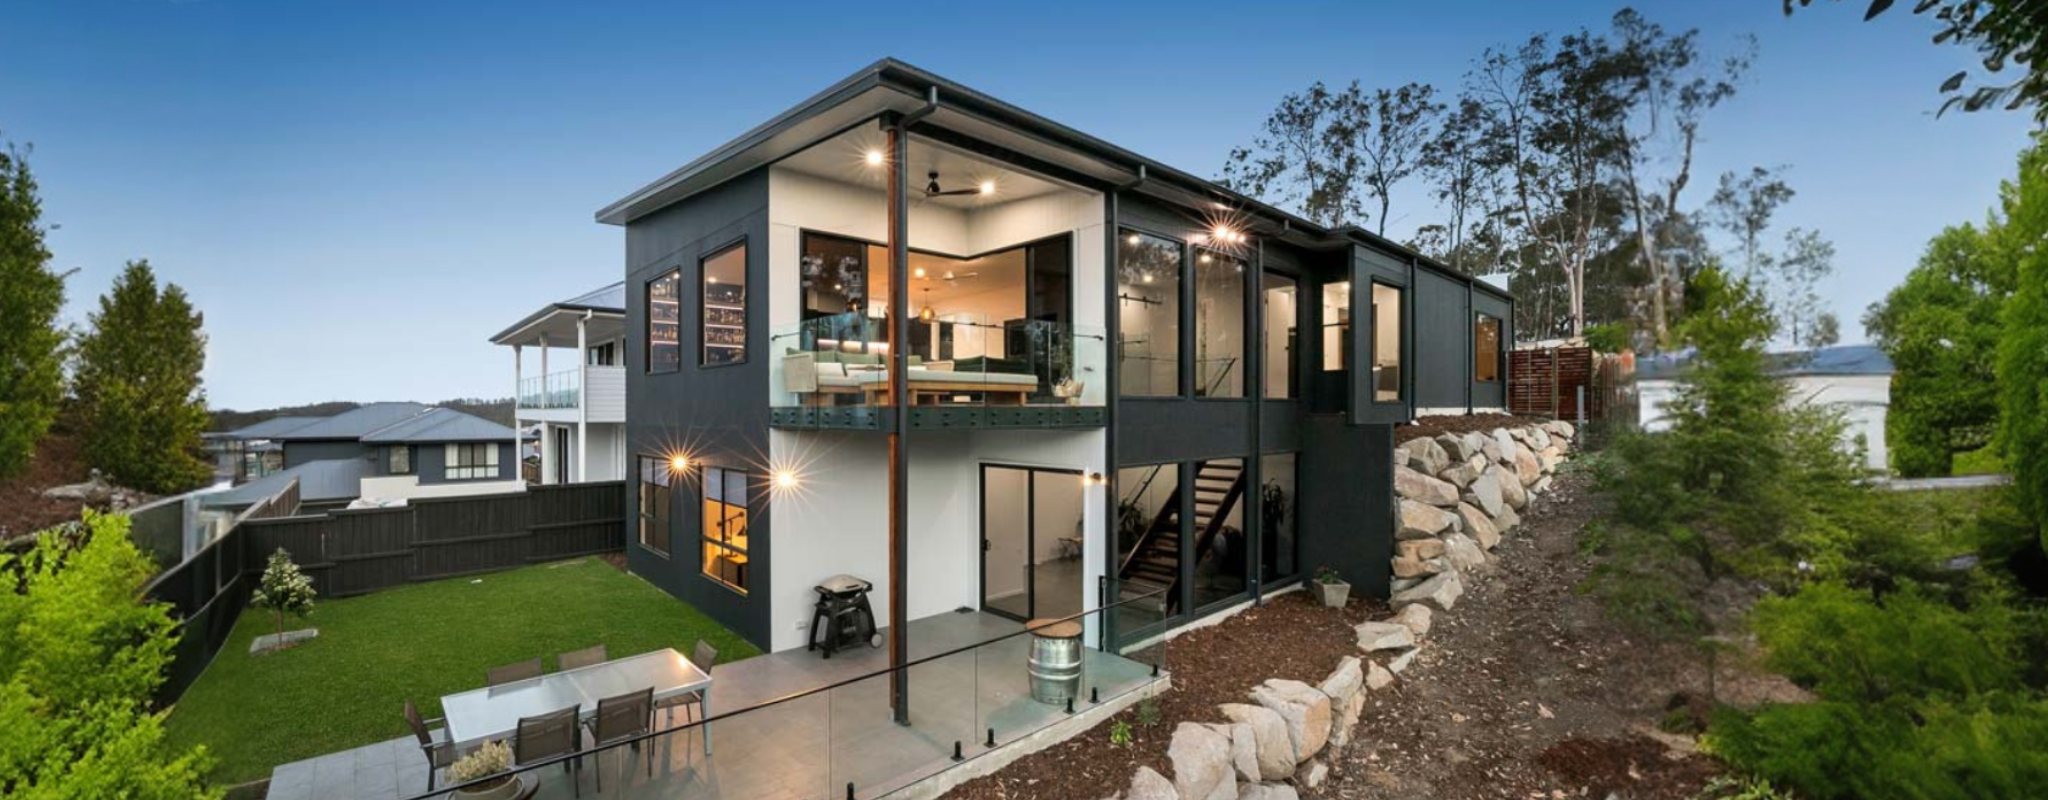 Looking for Home Designs With Indoor-Outdoor Synergy? These House